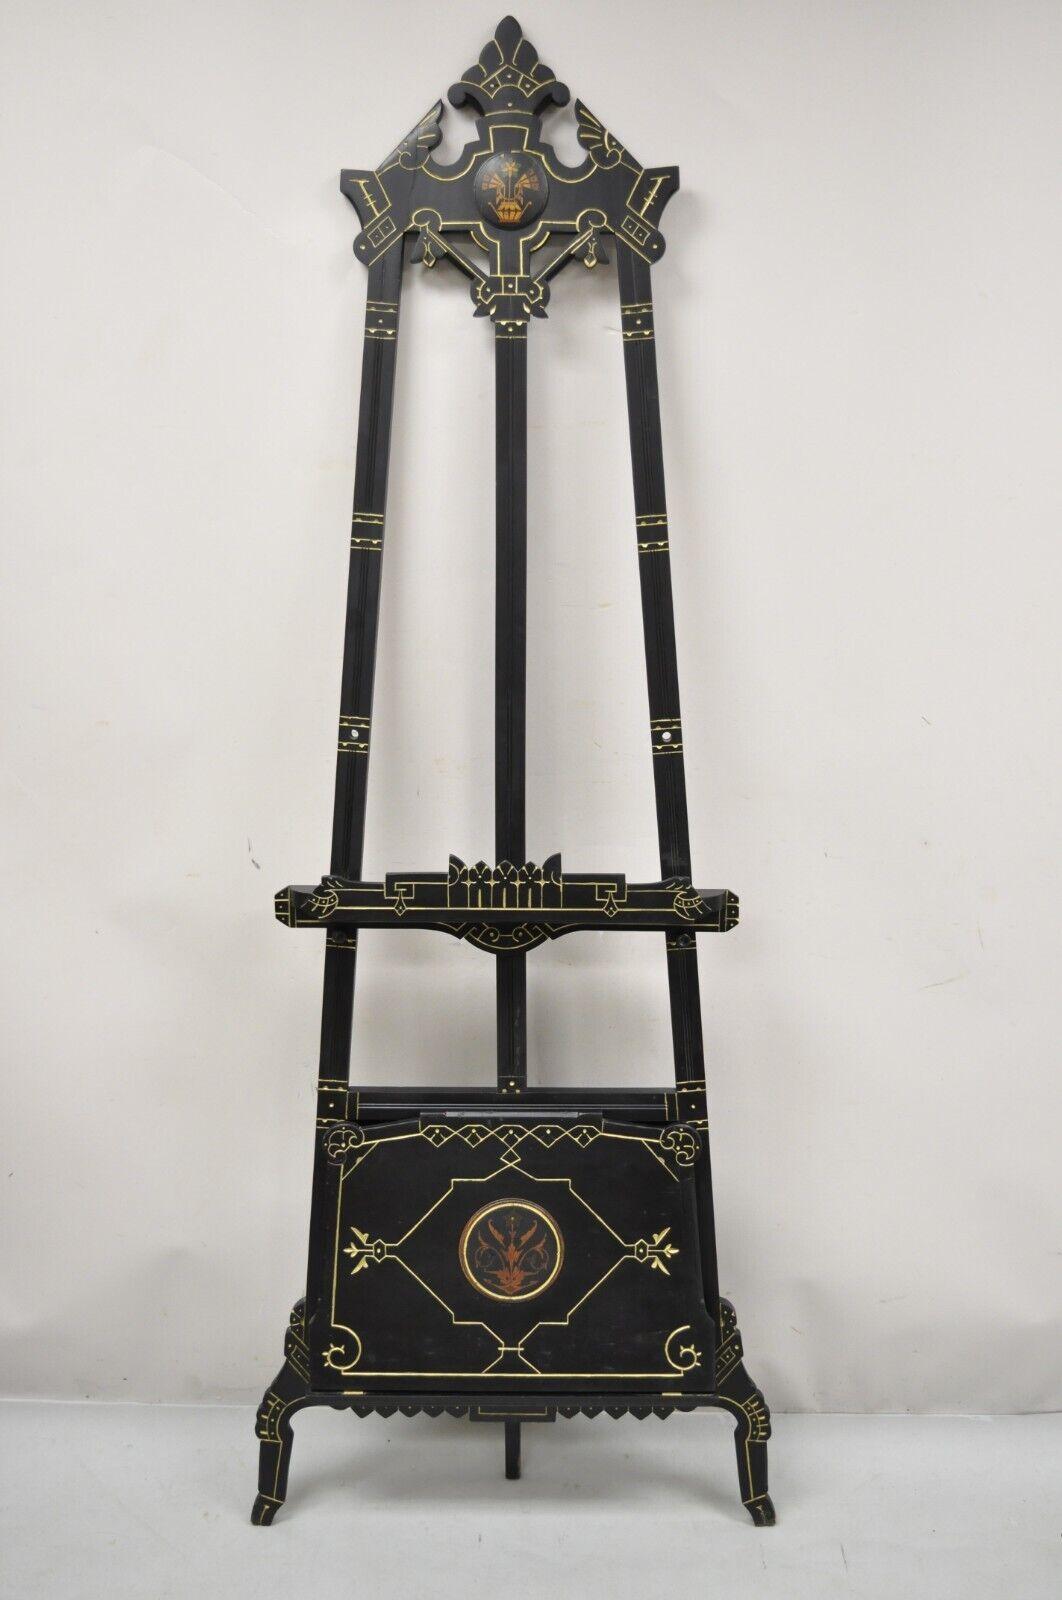 Antique Aesthetic Movement Victorian Ebonized Black Easel Art Painting stand. Item features original black ebonized finish, gold painted accents, fold out lower storage section, adjustable height easel rods, very nice antique item. Circa 19th